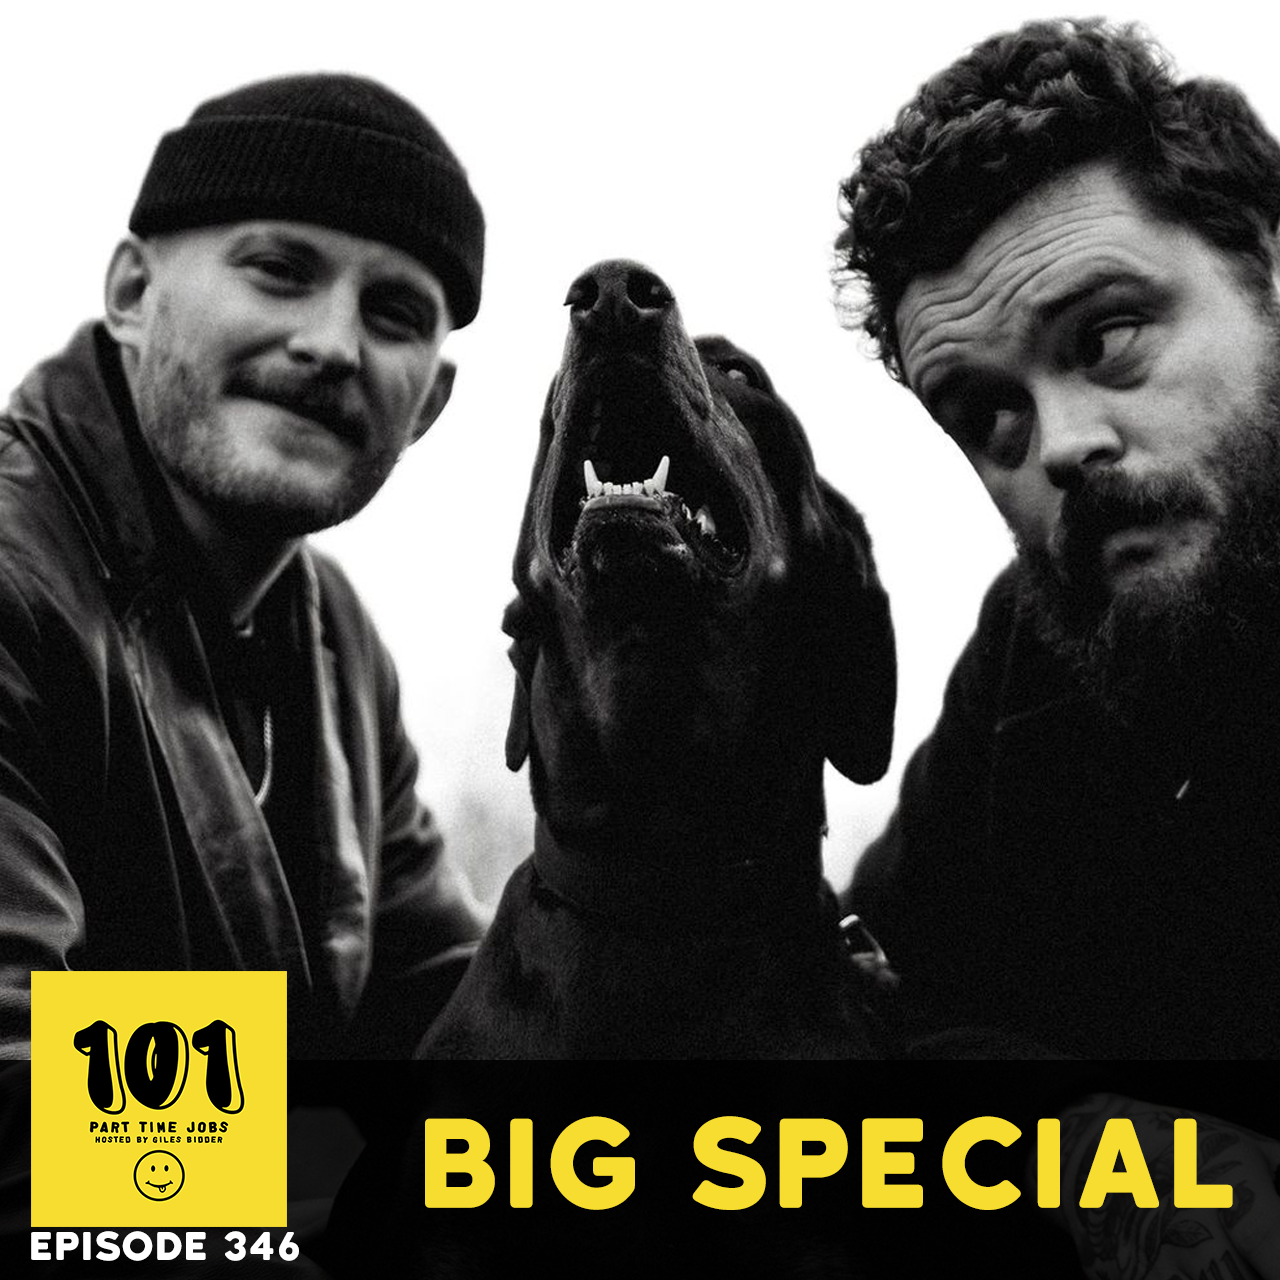 Episode BIG SPECIAL - "If you find it important to be honest... that's the point of it"